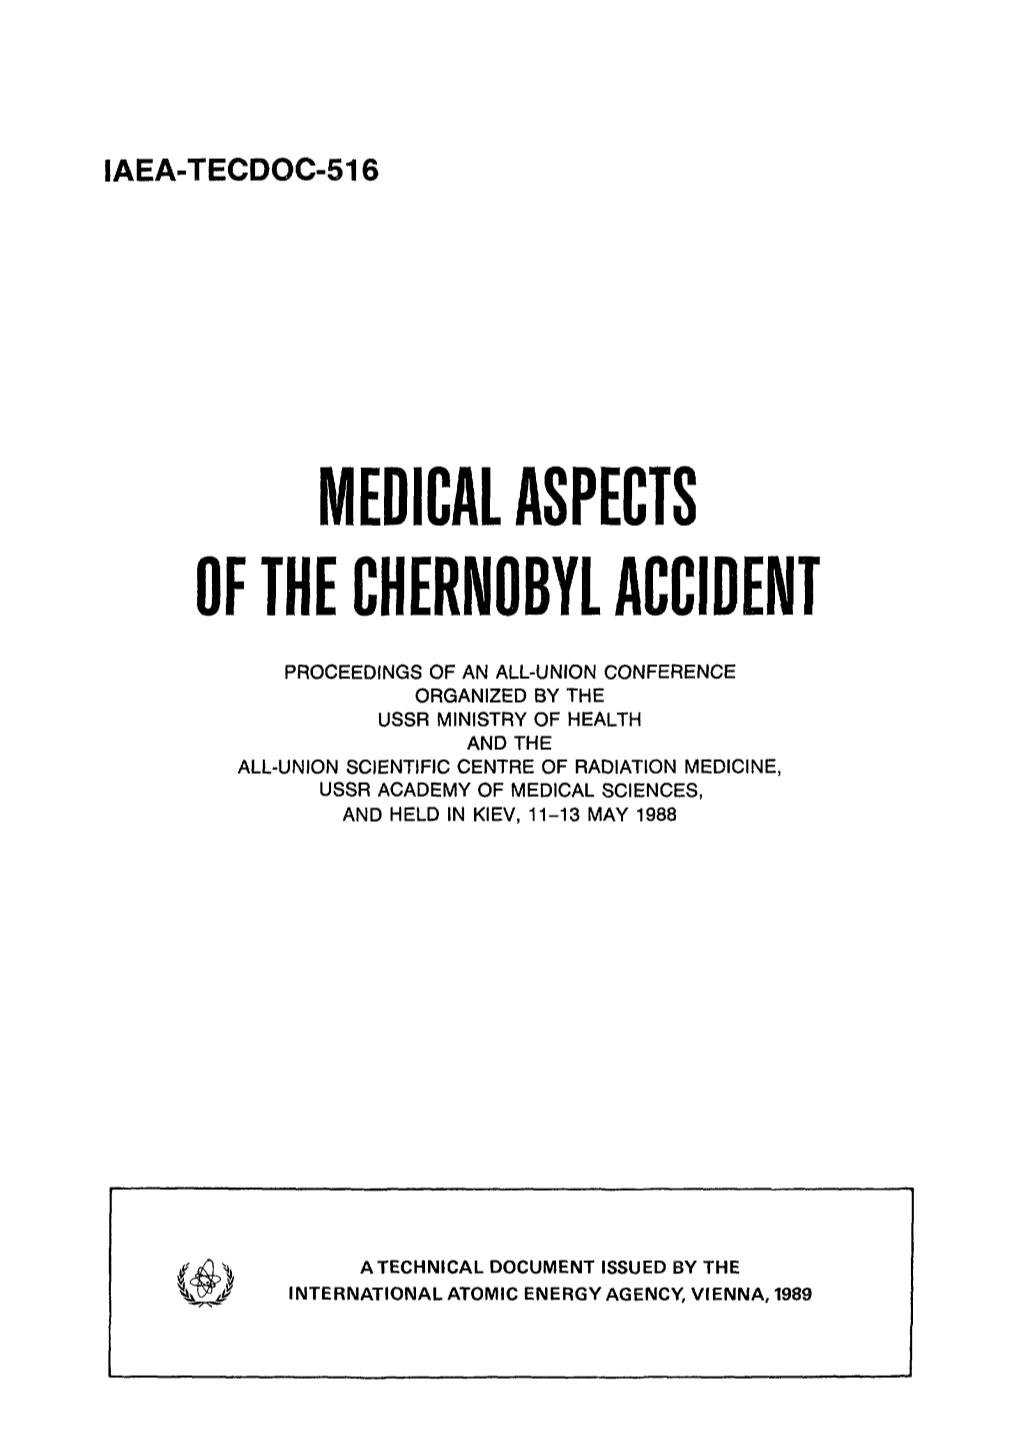 Medical Aspects Chernobye Ofth L Accident